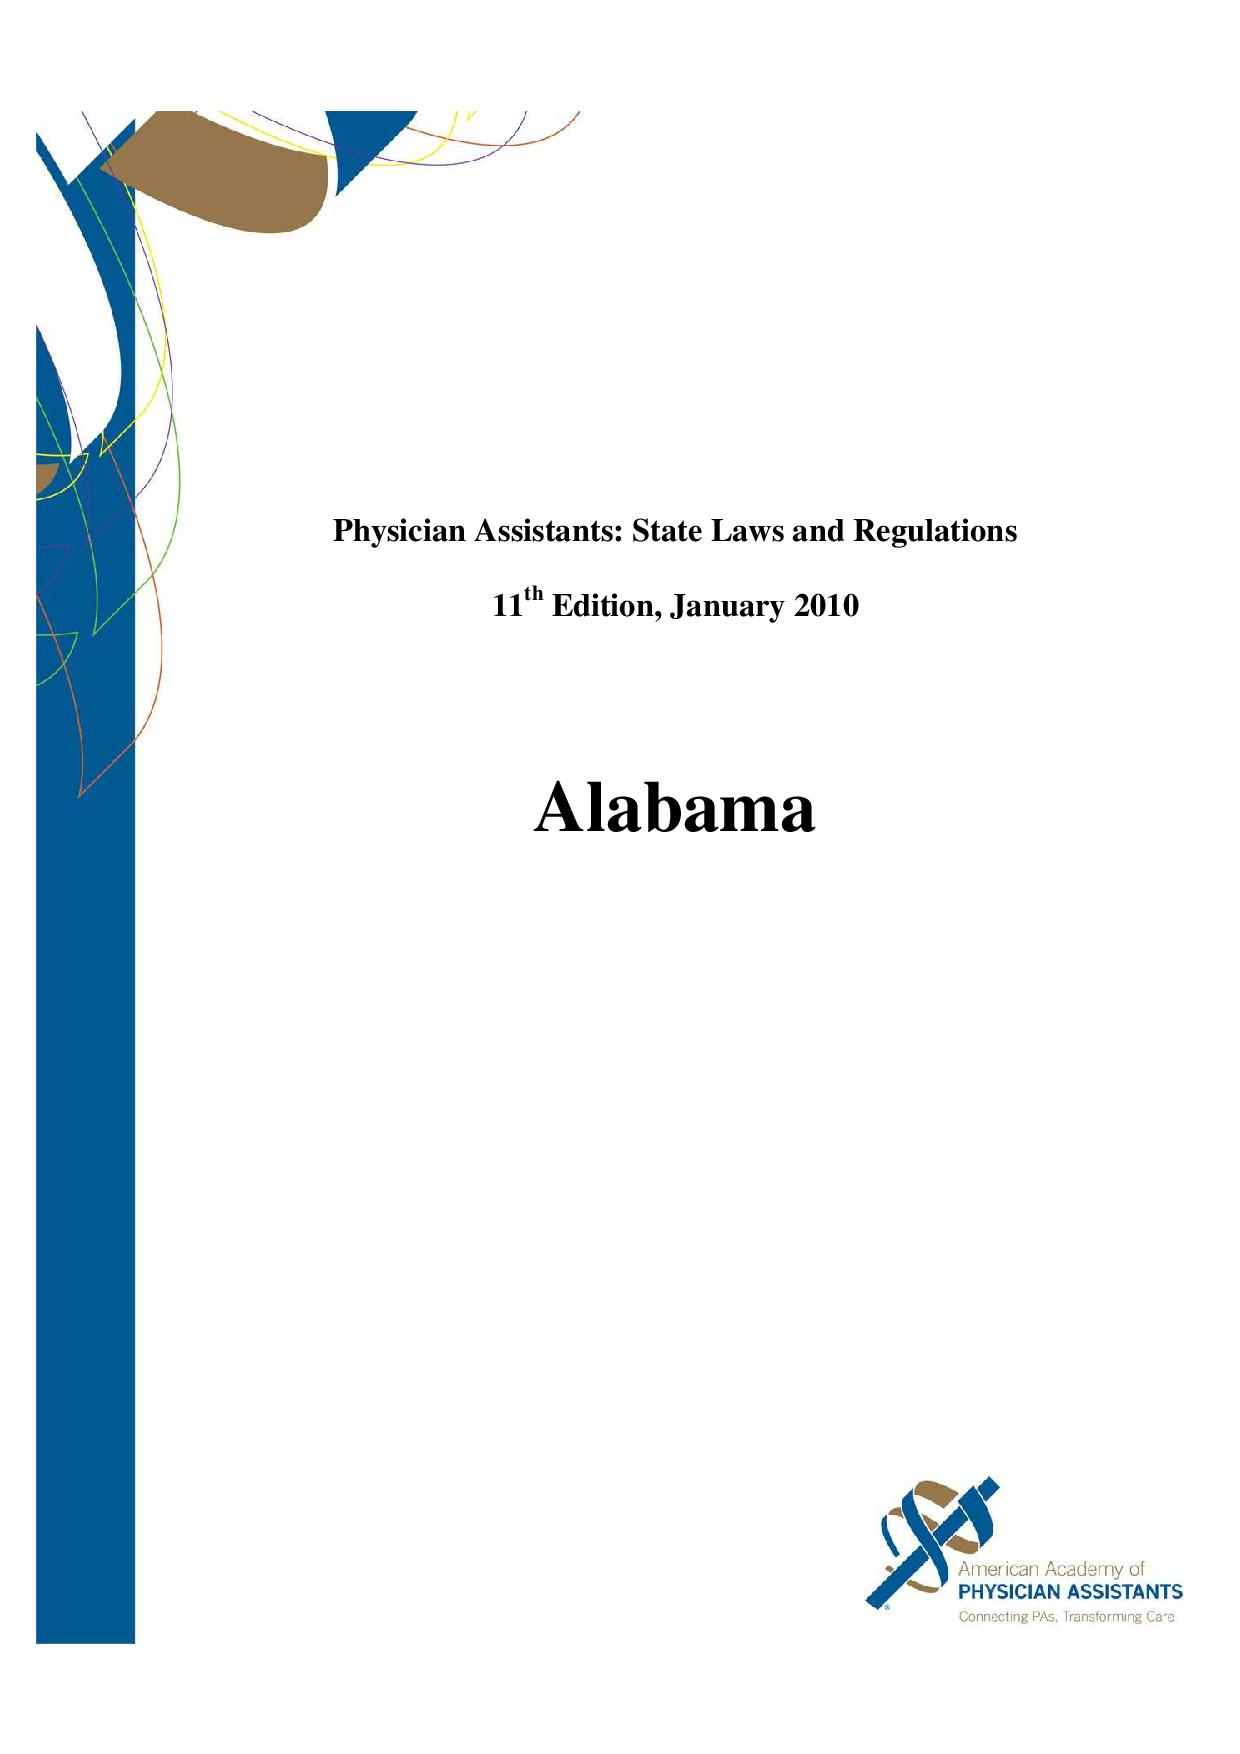 PA State Laws and Regulations 11th Edition